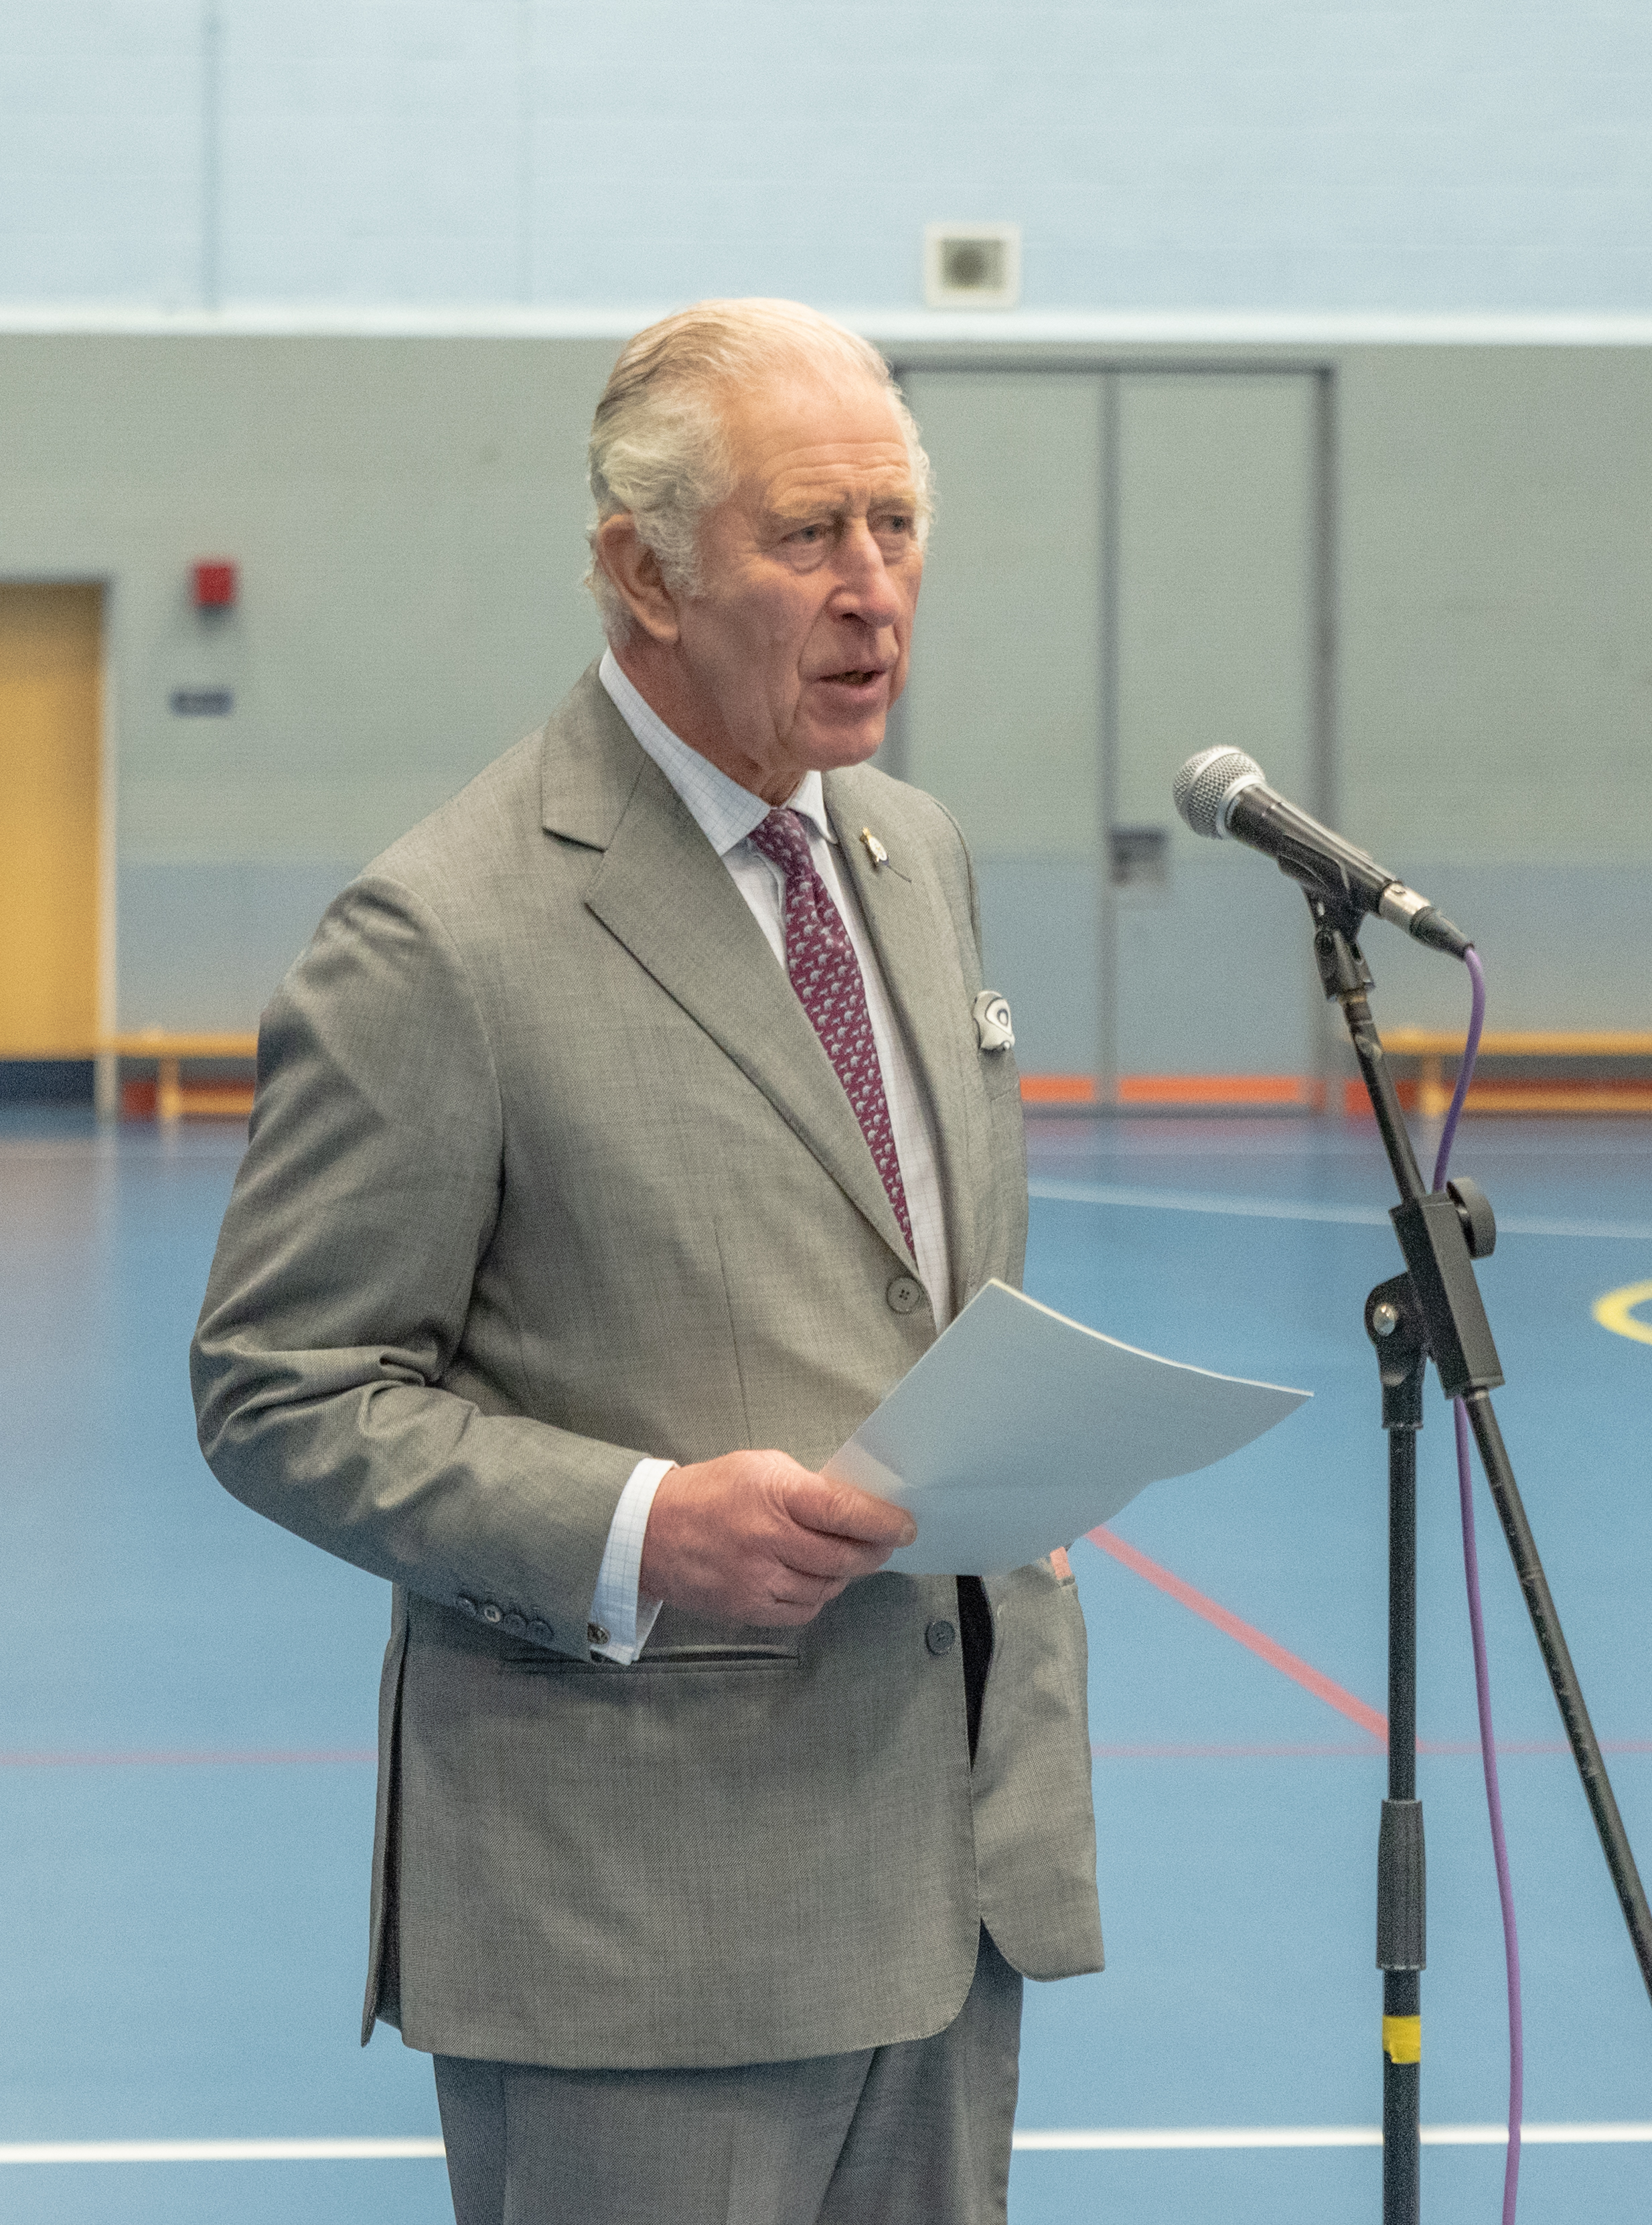 King Charles III visits the College